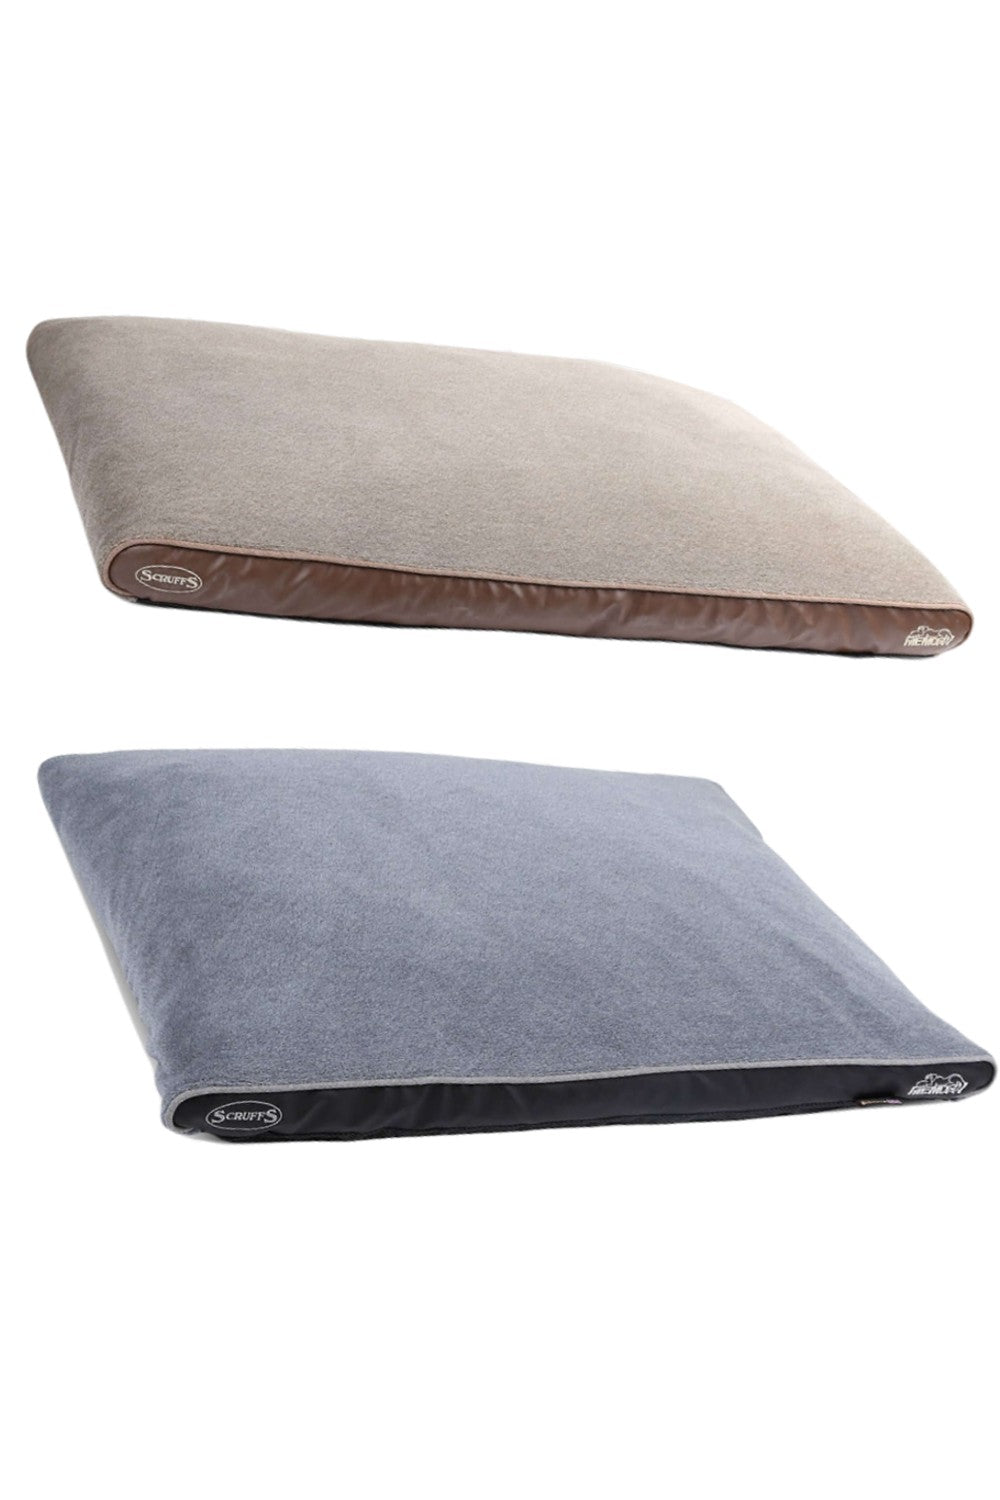 Scruffs Chateau Memory Foam Orthopaedic Pillow In Latte and Dove